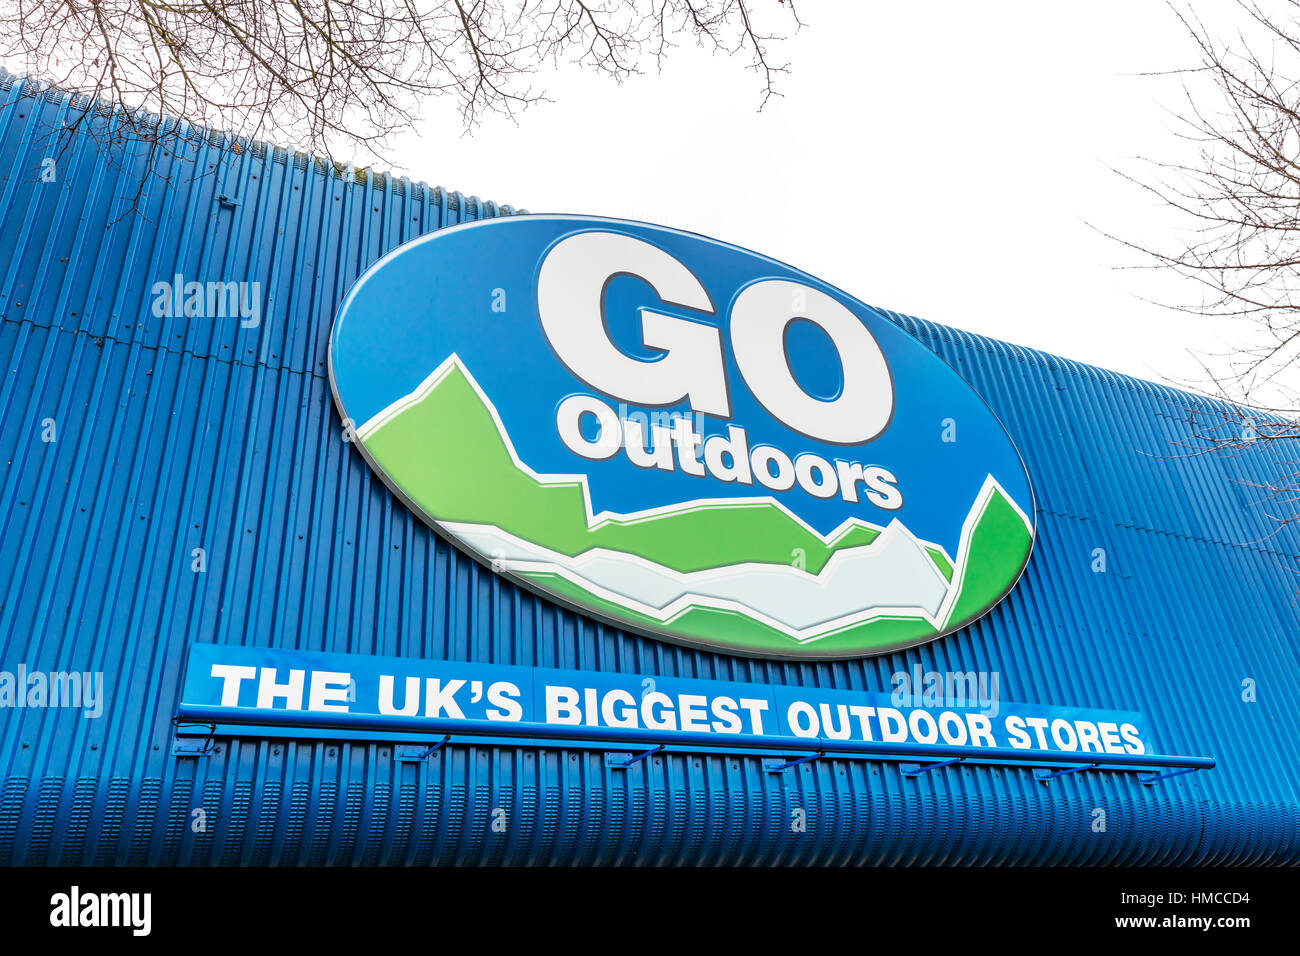 Go outdoors clothing store outdoor store sign on building outdoor supplies UK England Stock Photo